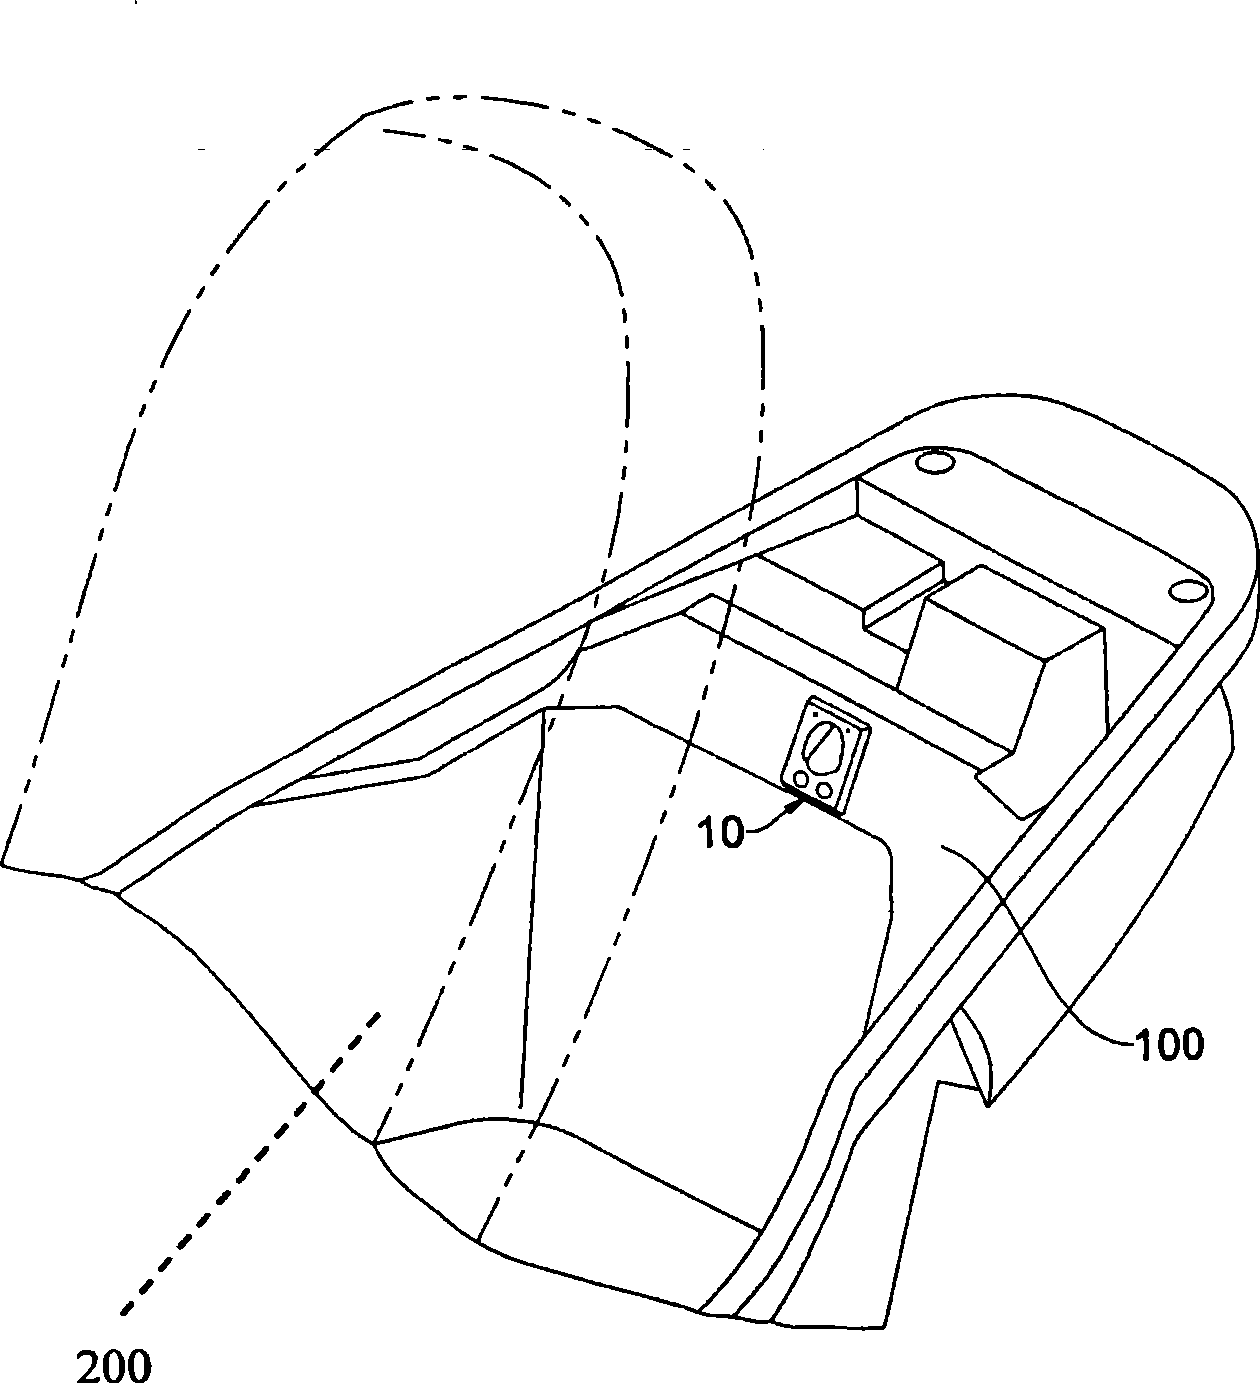 Fingerprint identification anti-theft device and method for motorcycle